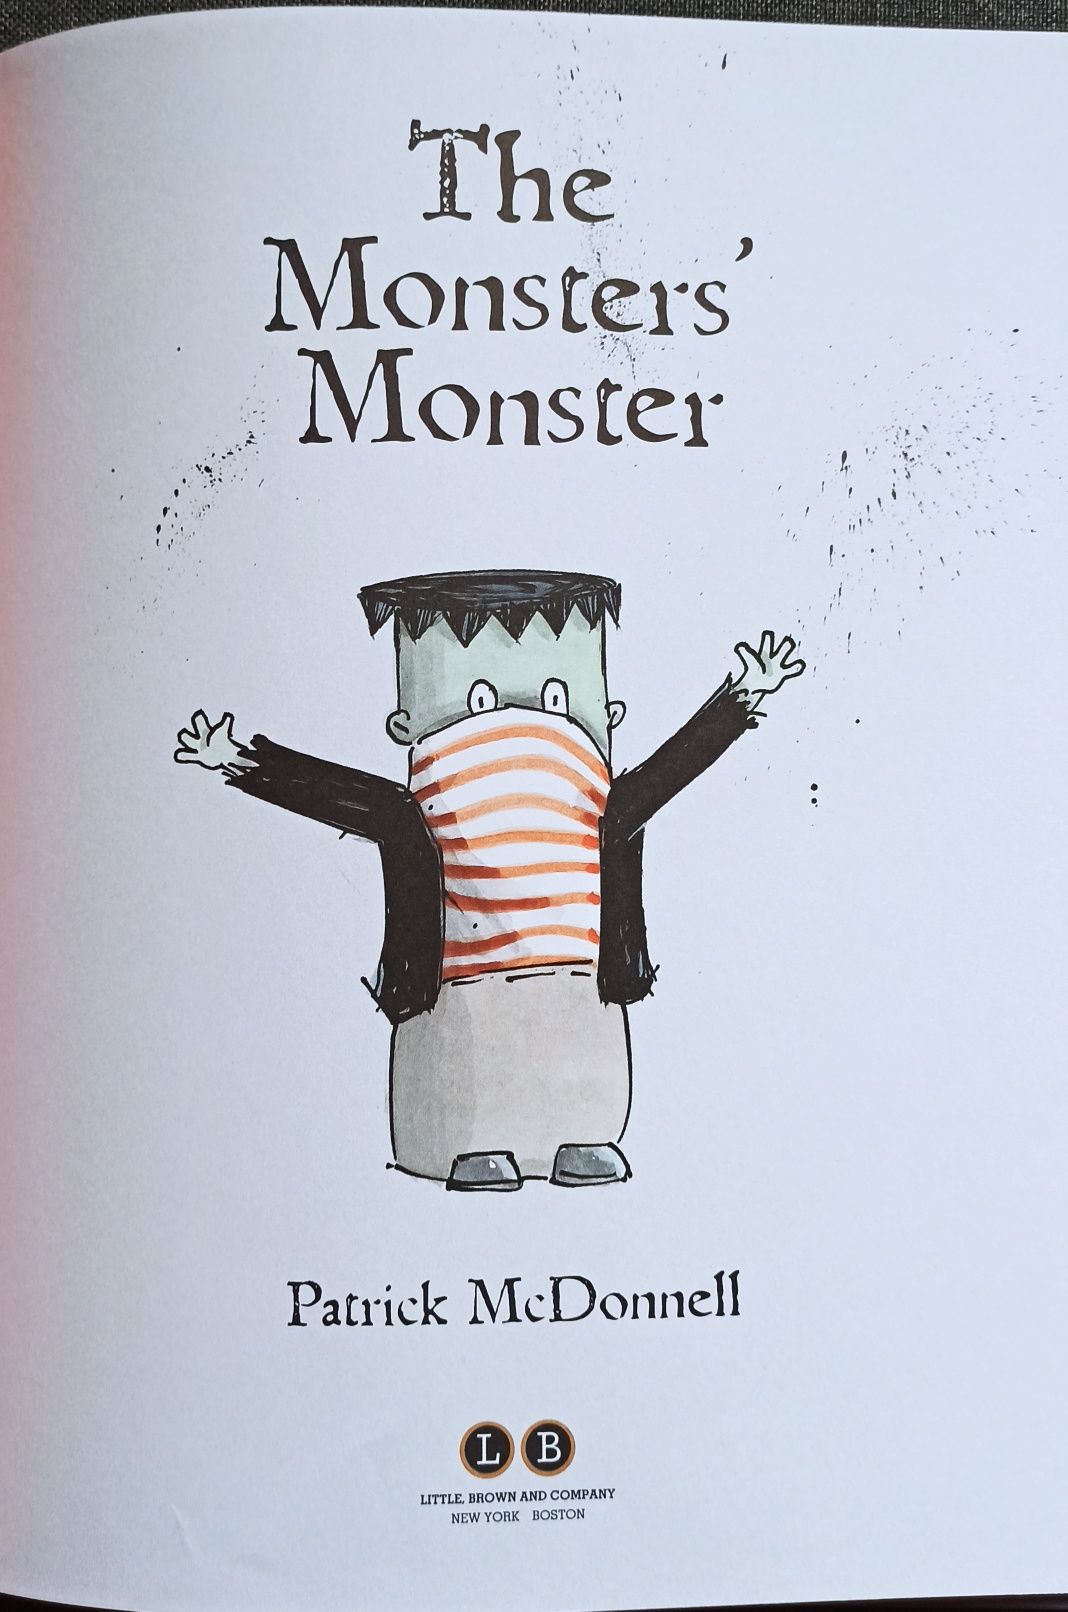 The monsters monster Patrick McDonnell